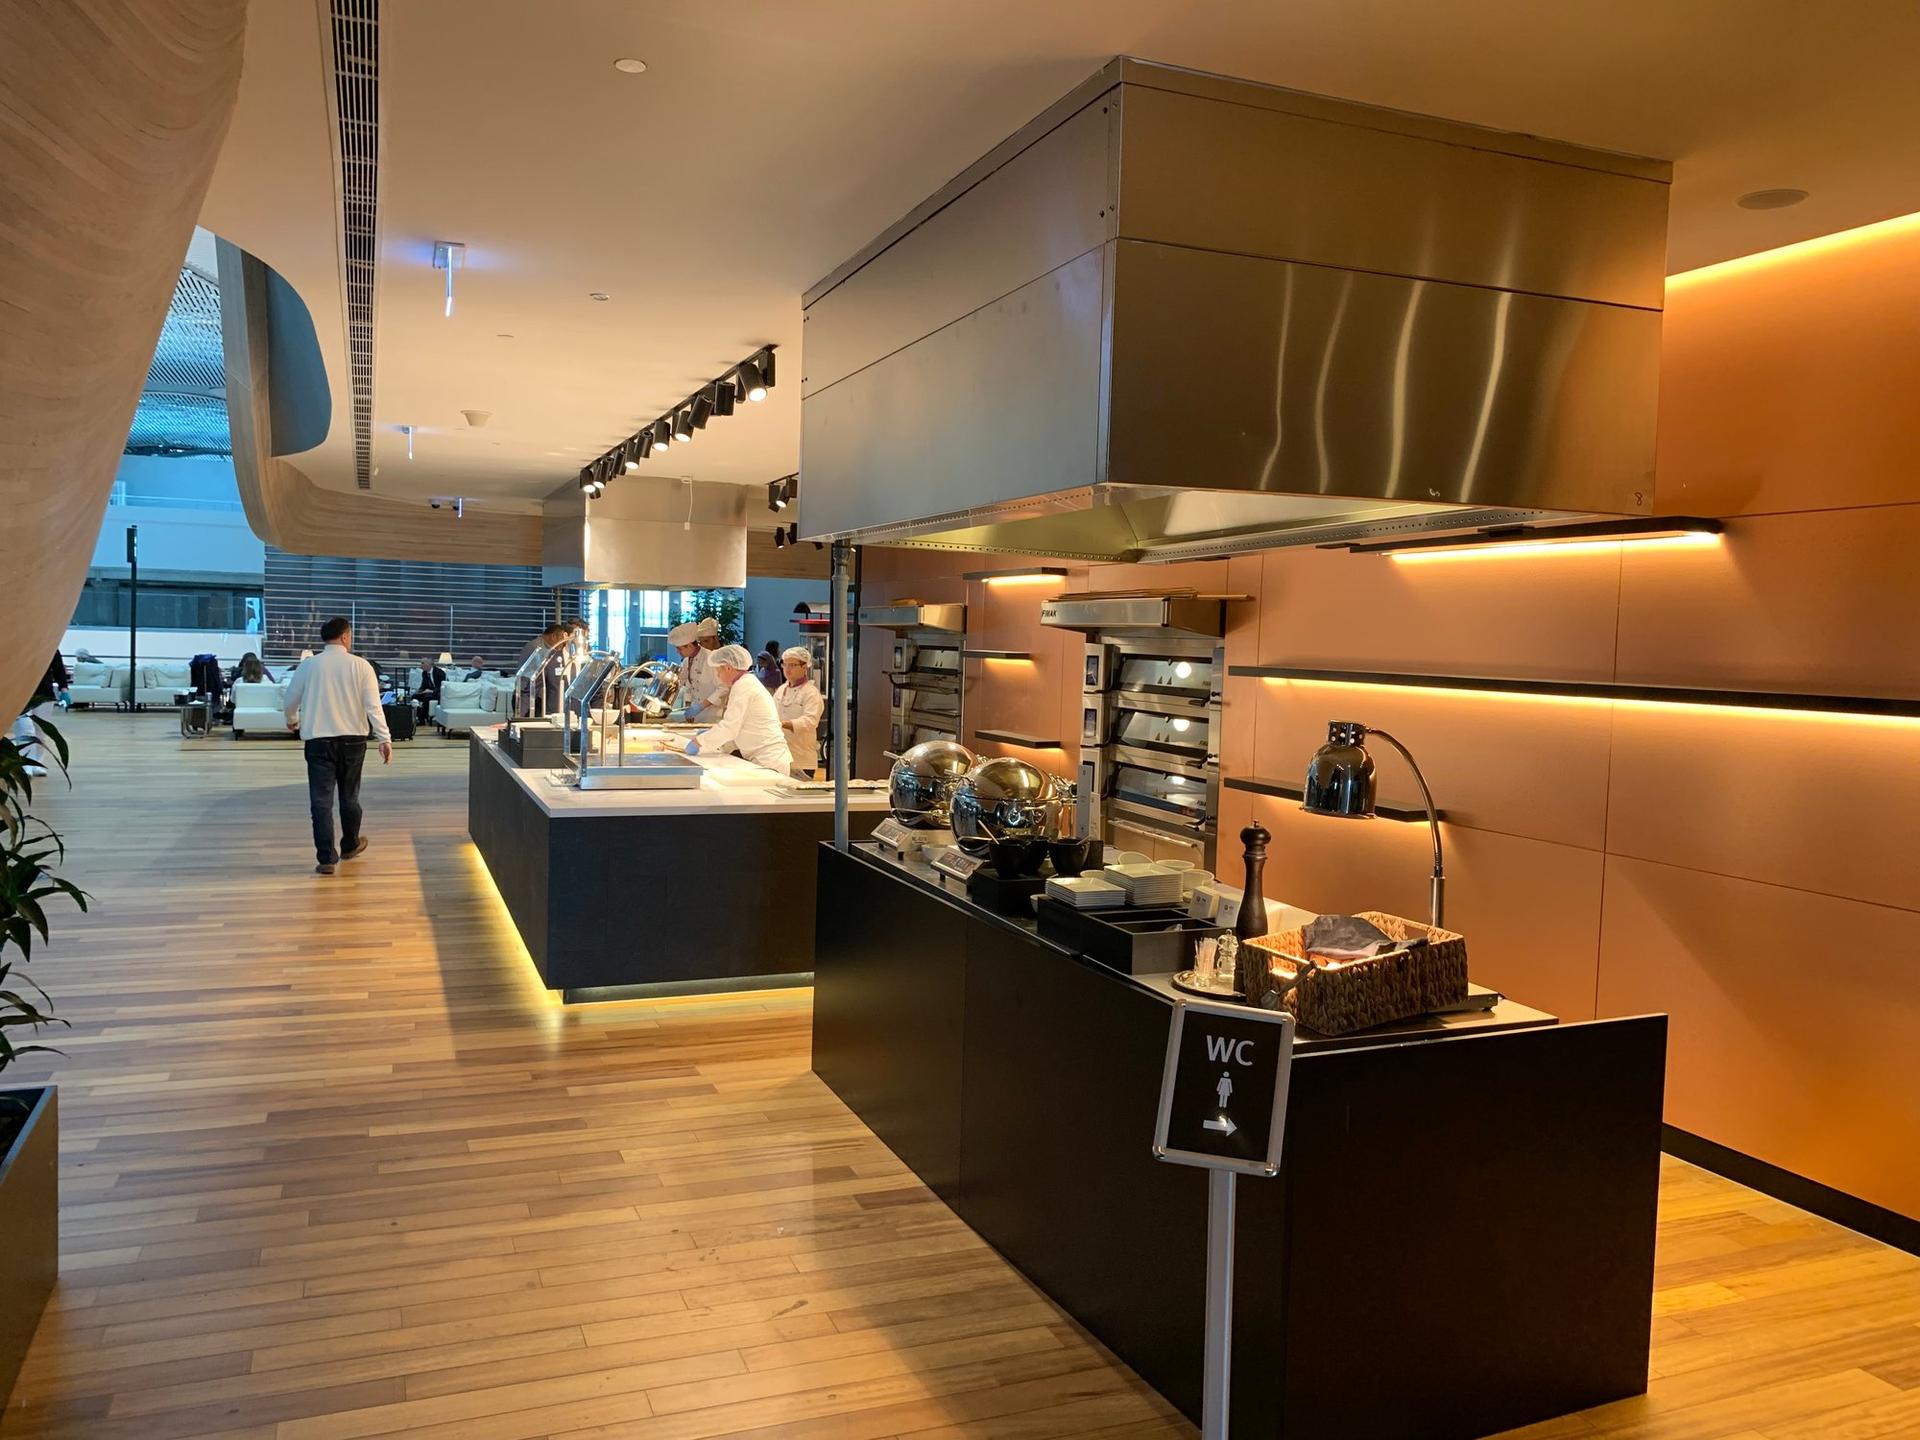 Turkish Airlines Business Lounge image 5 of 8